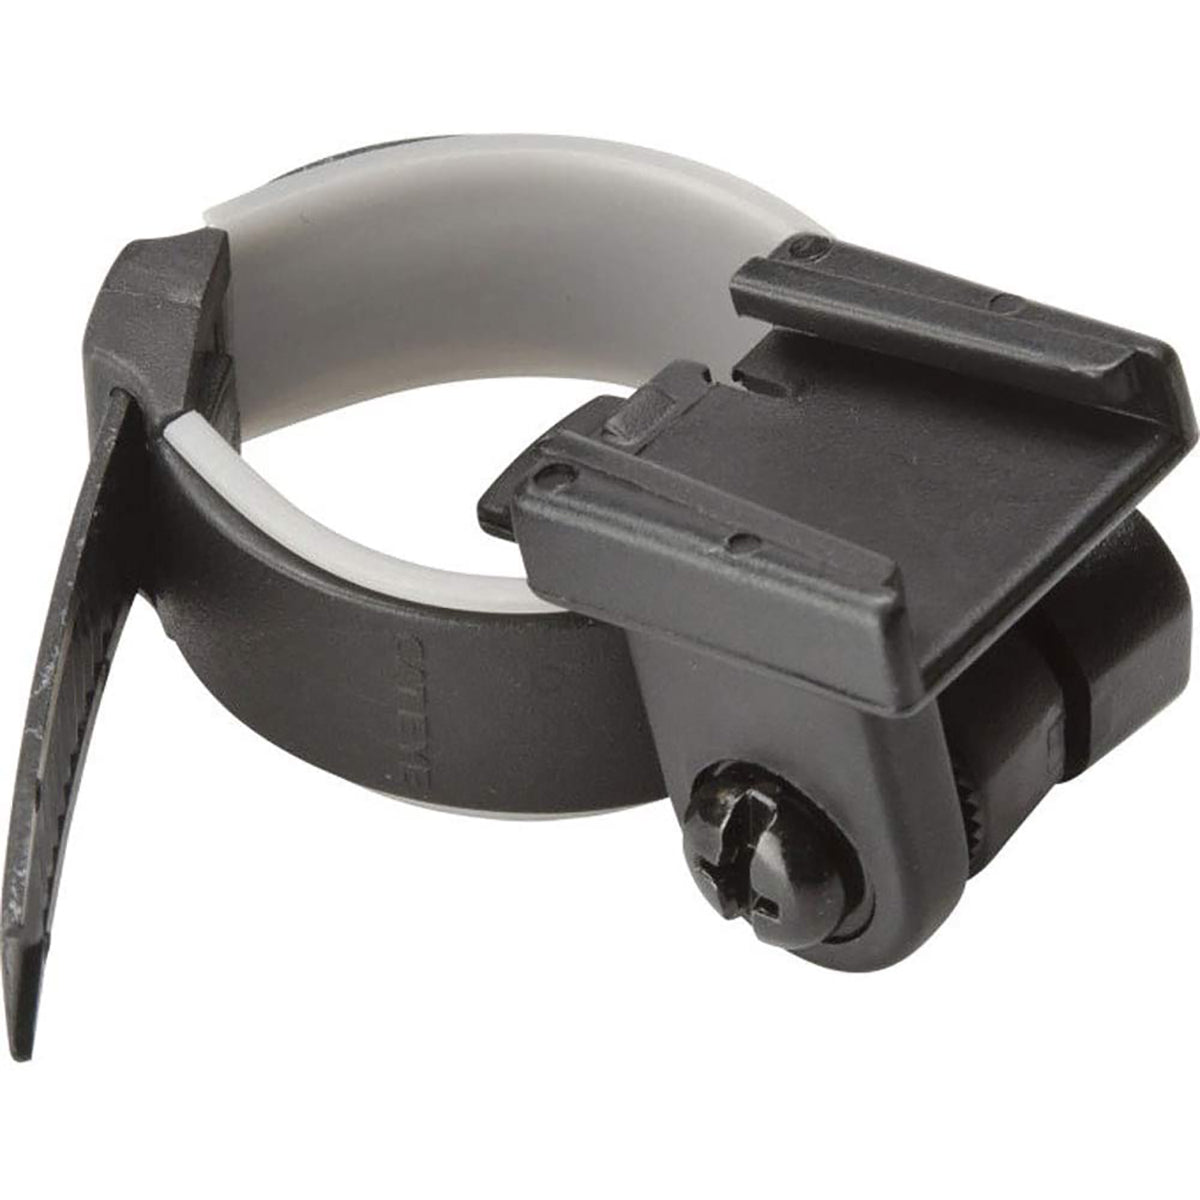 CatEye TL-LD170 Bicycle Tail Light Clamp and L1 Bracket CatEye